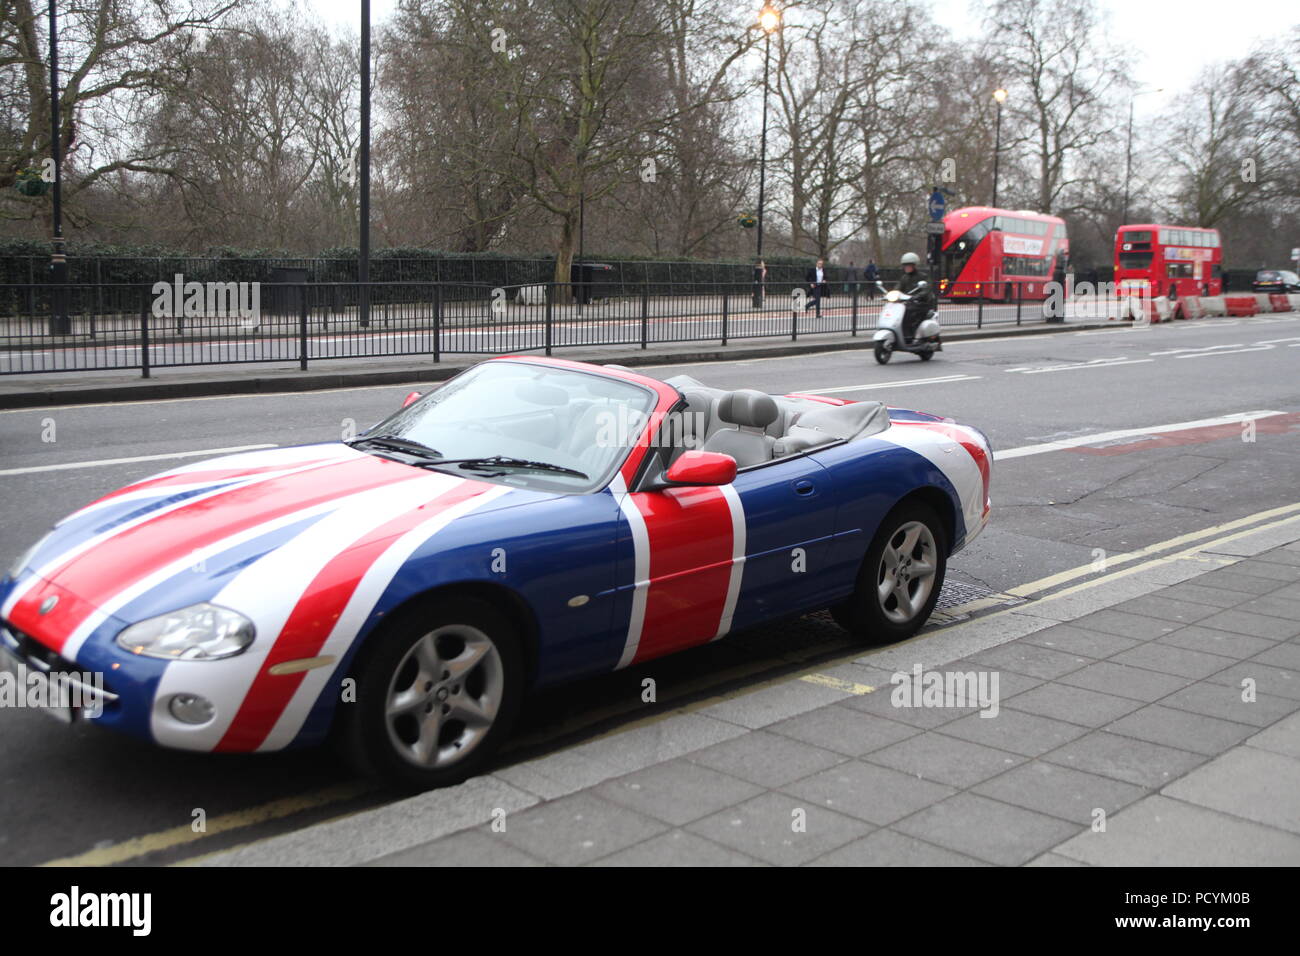 Cabriolet type sport Union Jack painted car parked at Park Lane near Grosvenor House Hotel on chilly winter day, with two double-deckers in background Stock Photo